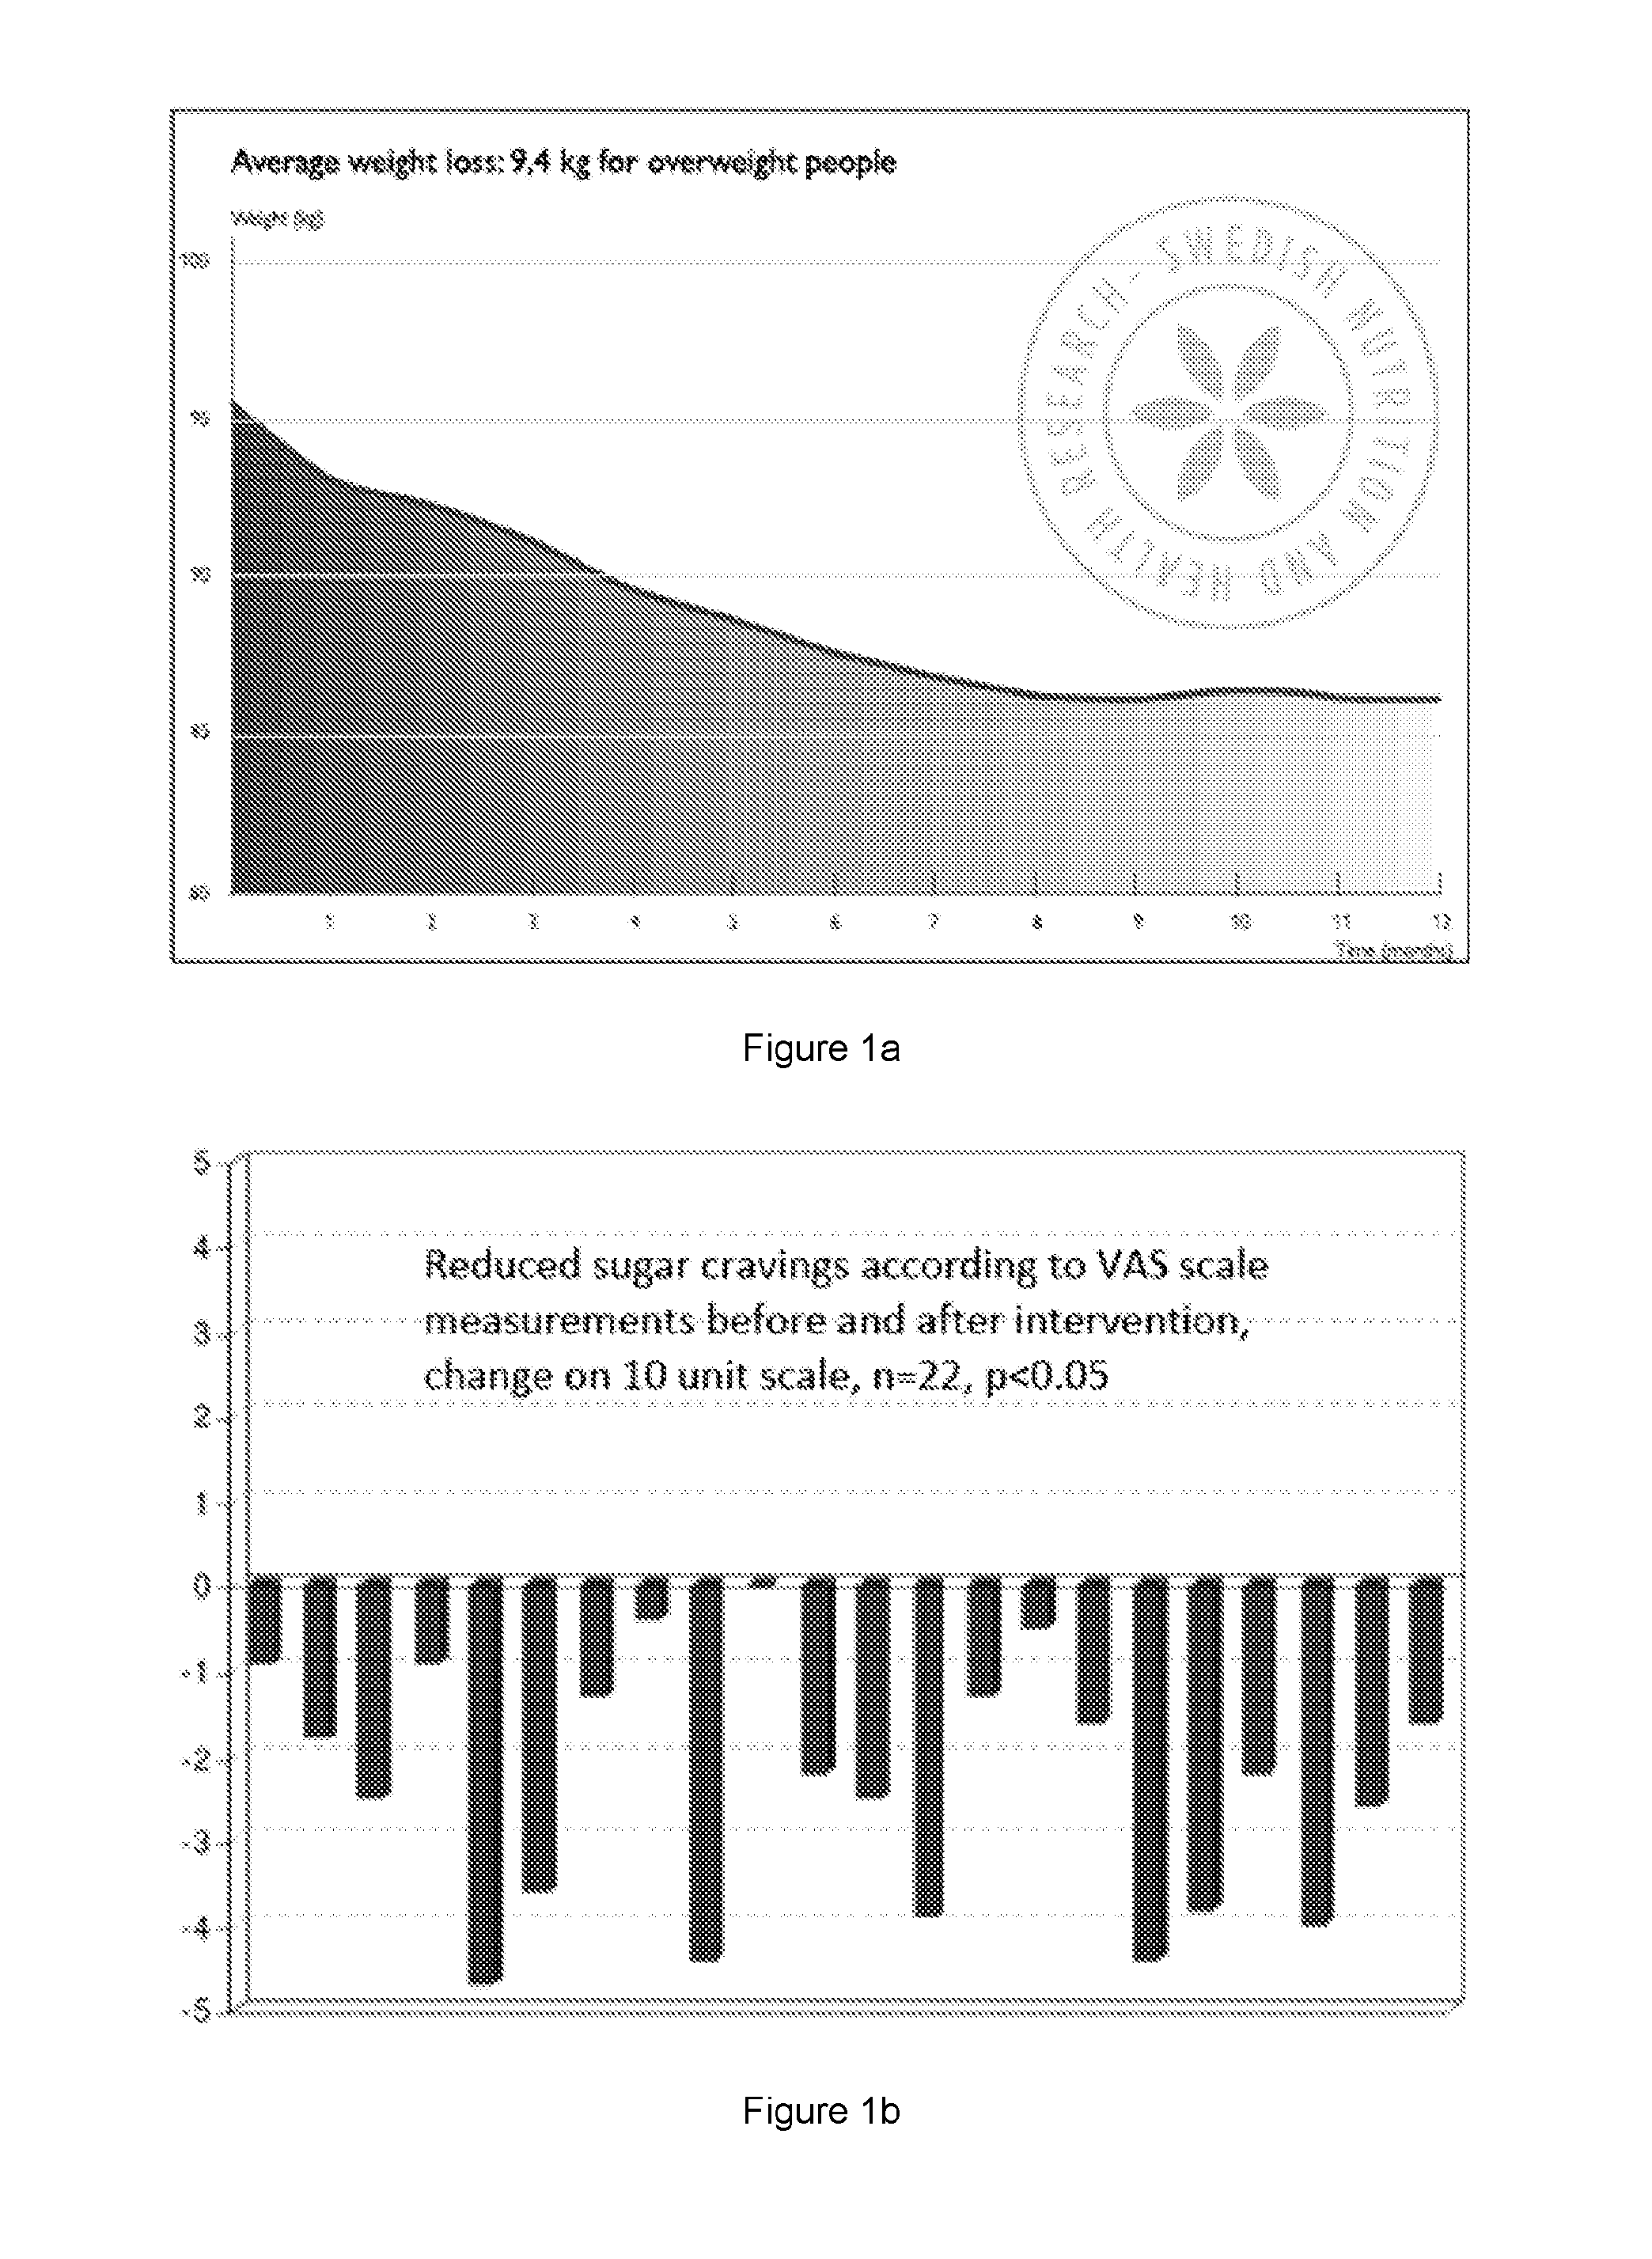 Administration of a food composition product